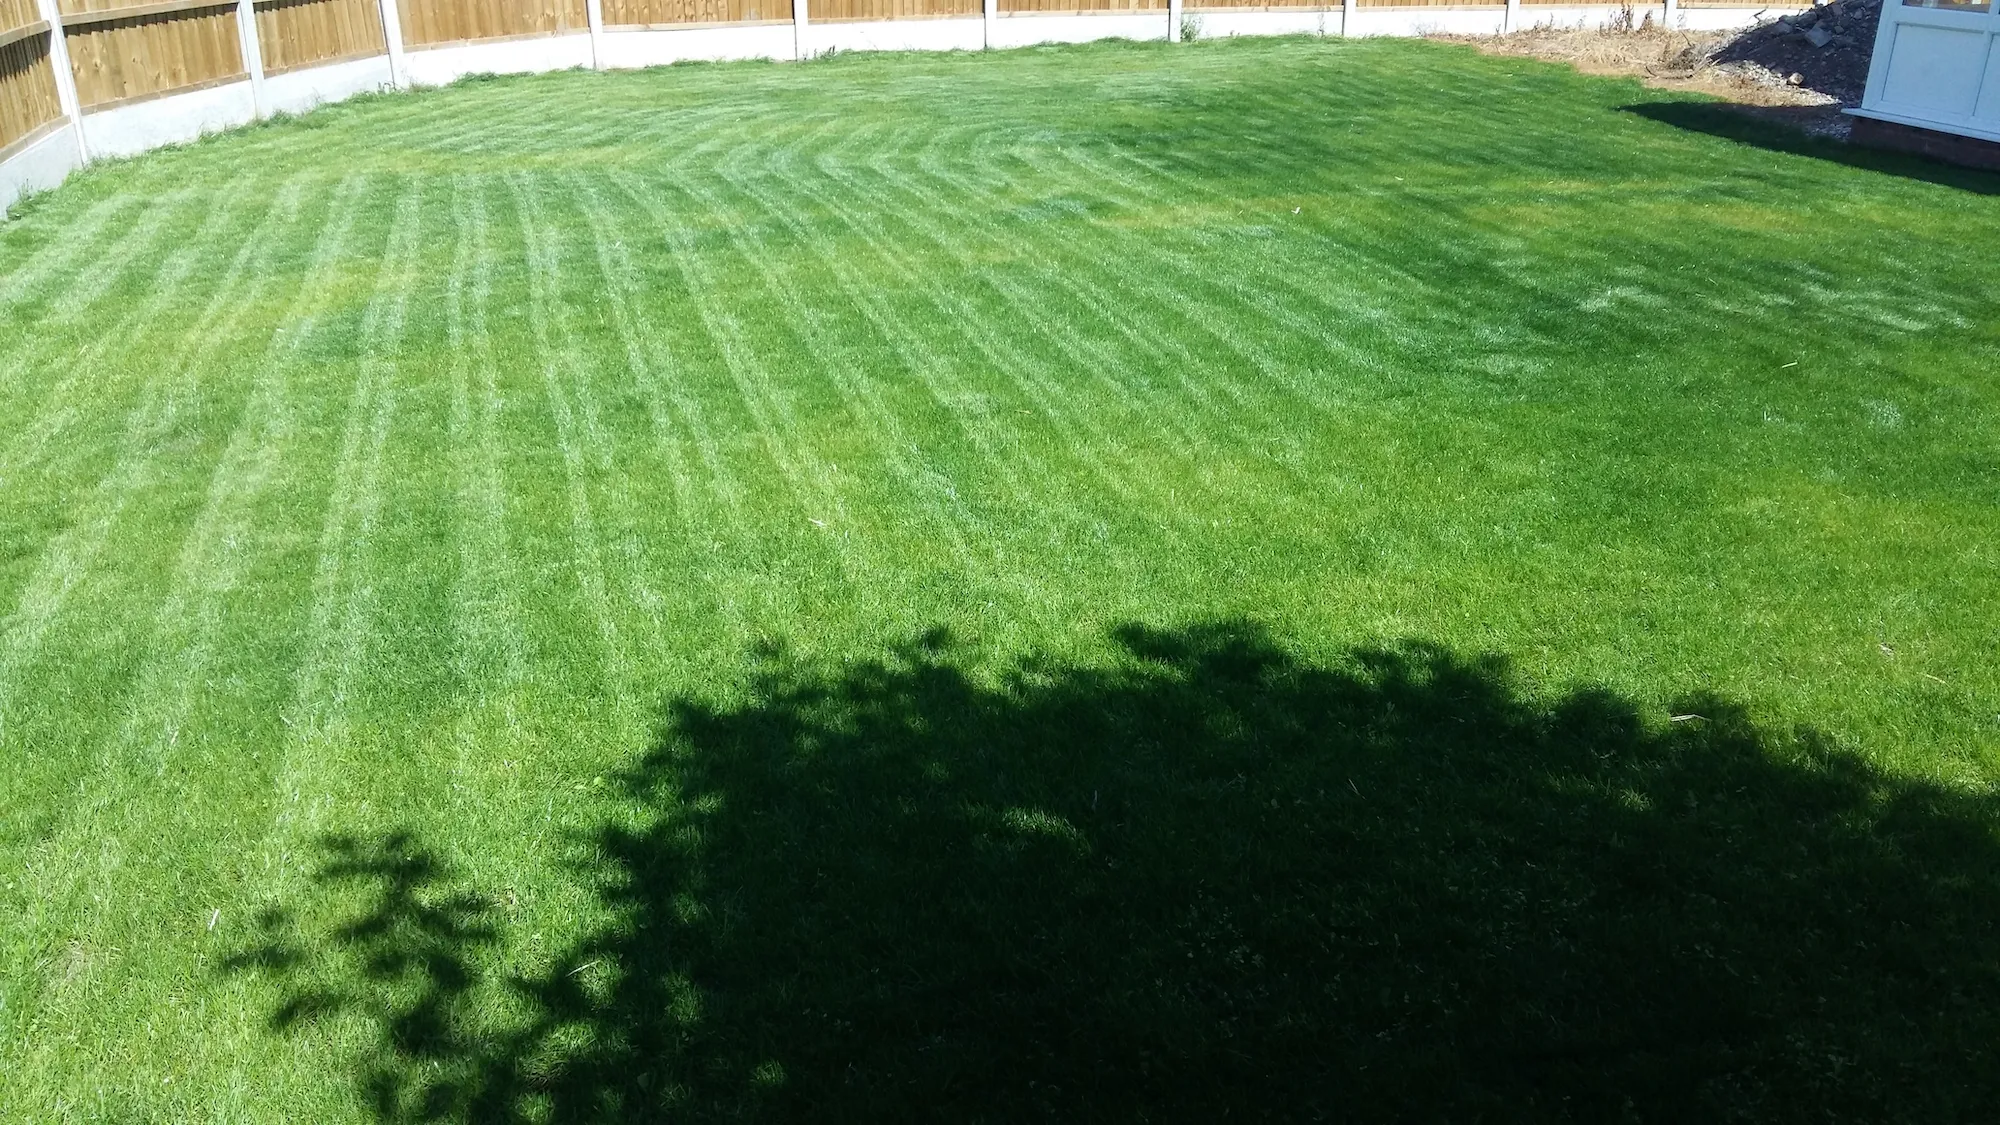 green grass with stripes mown